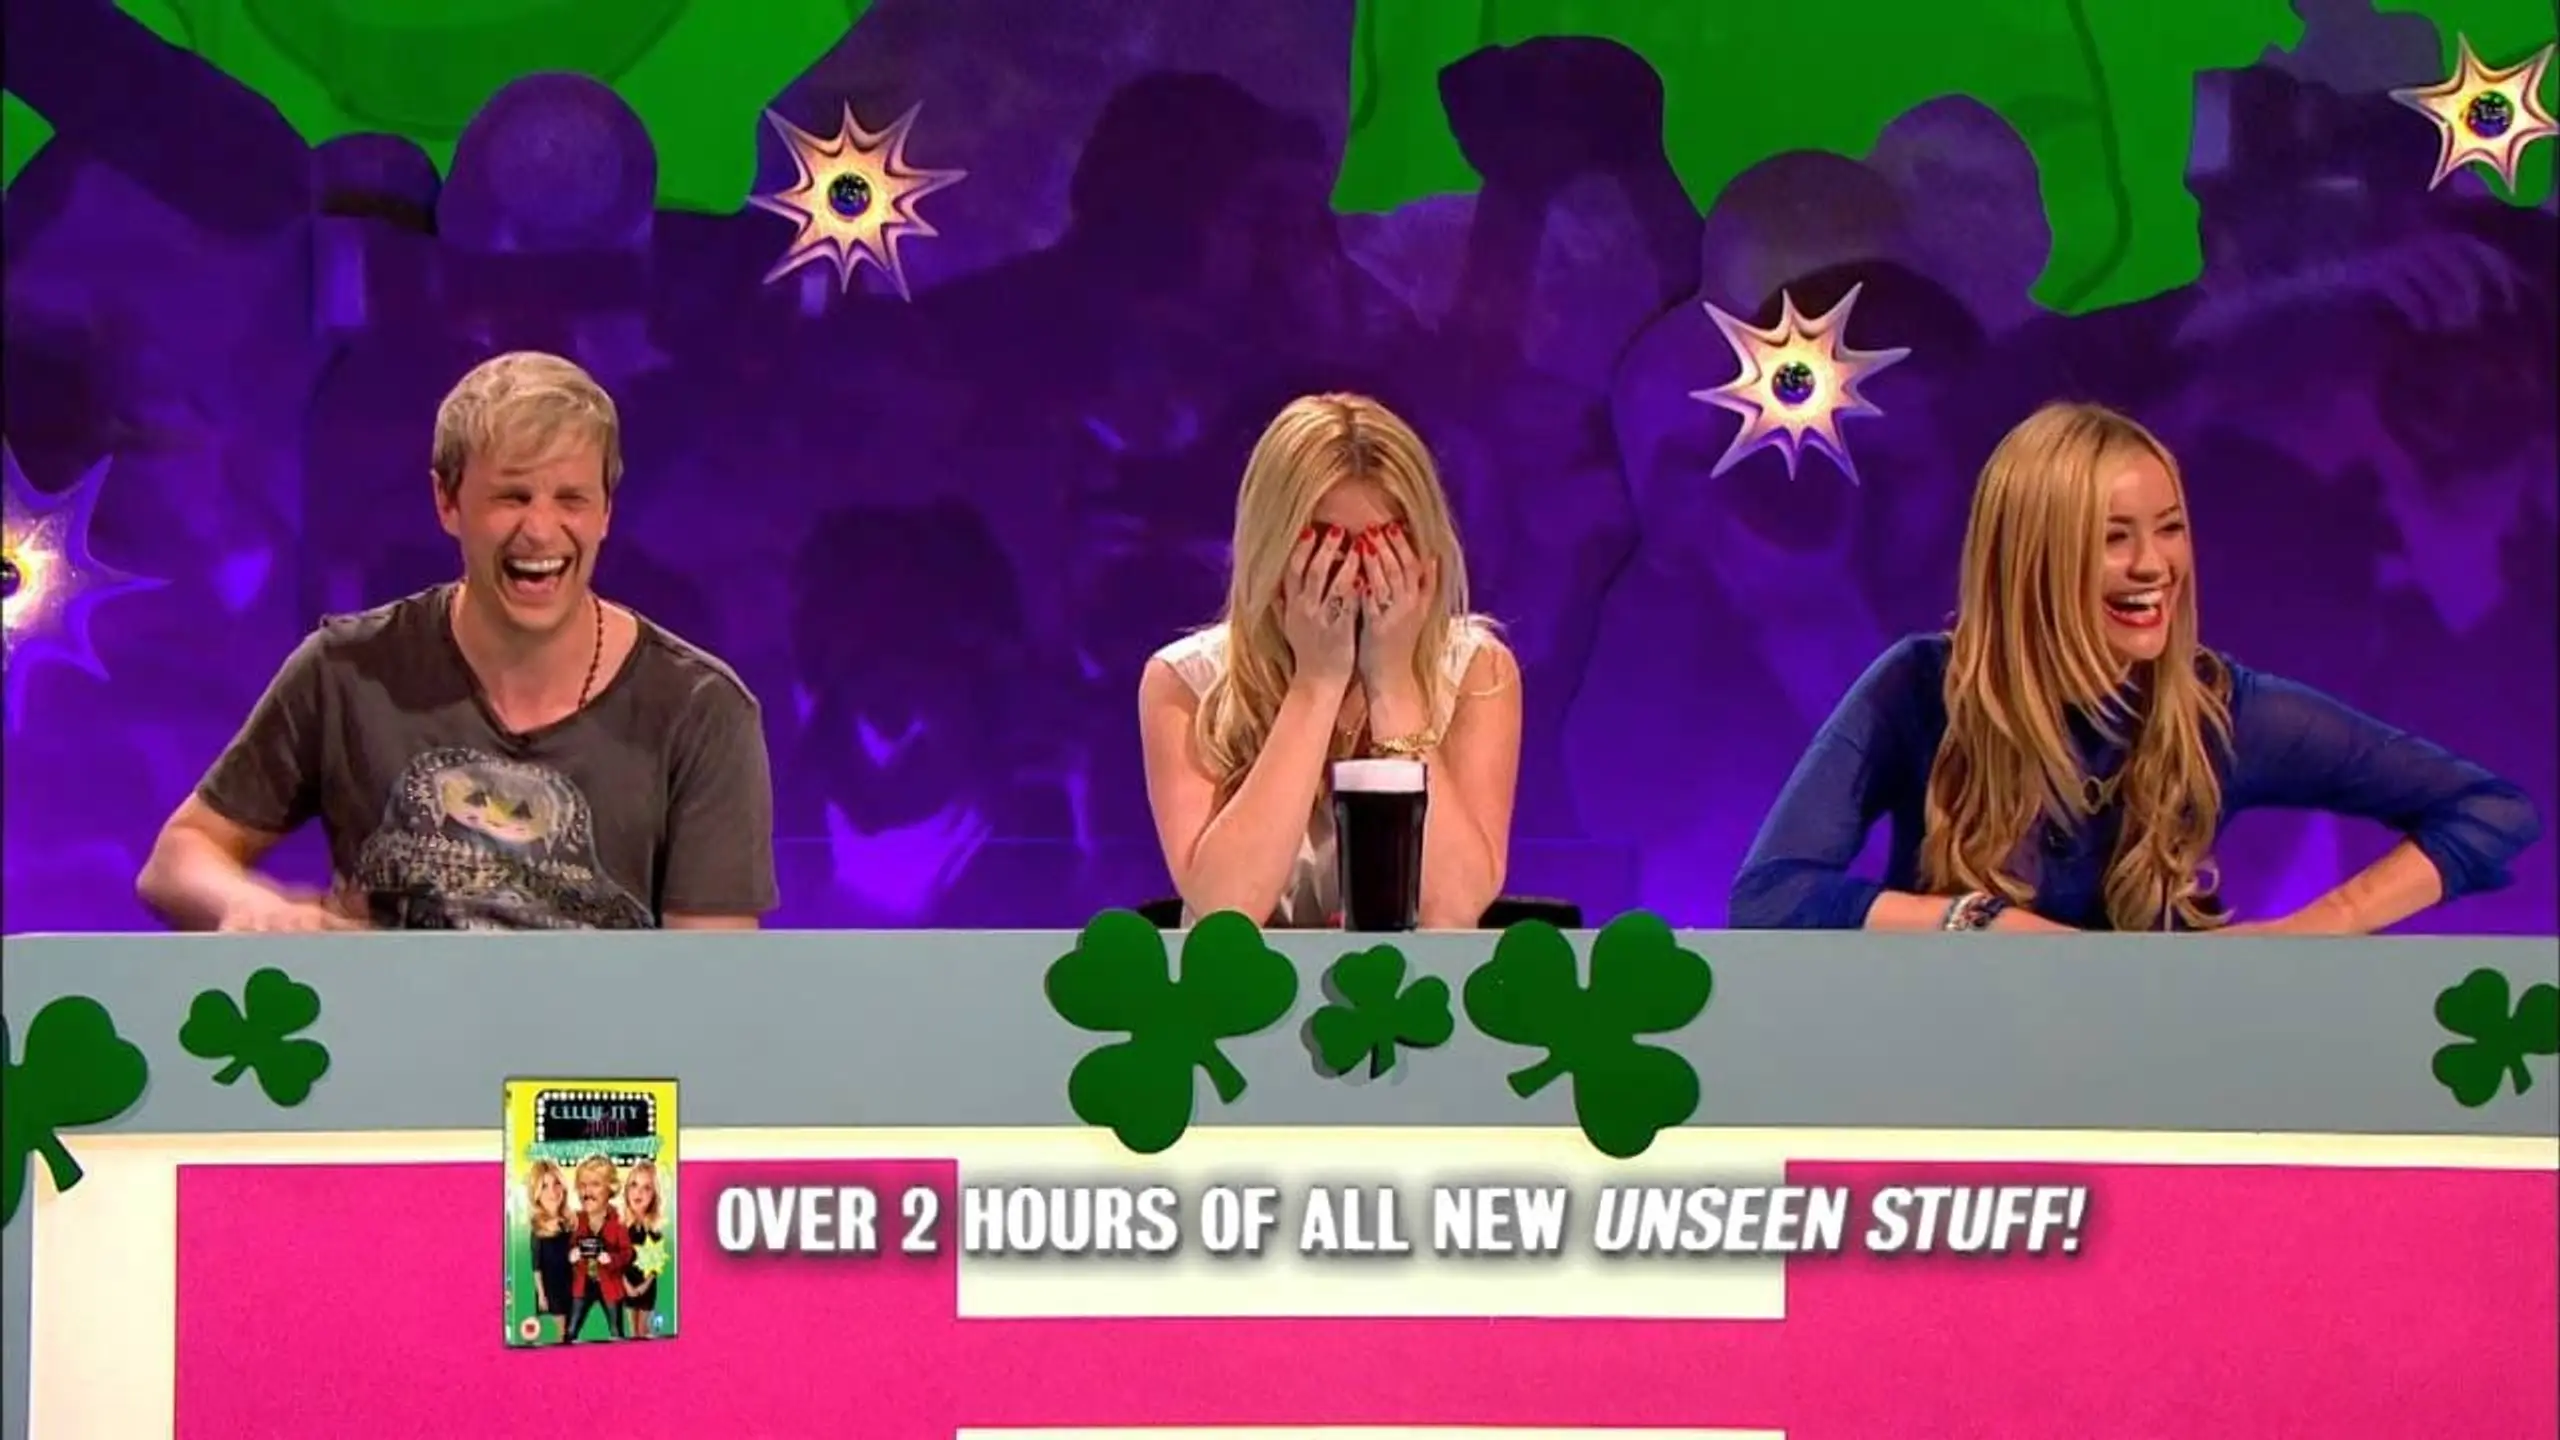 Celebrity Juice: Obscene and Unseen